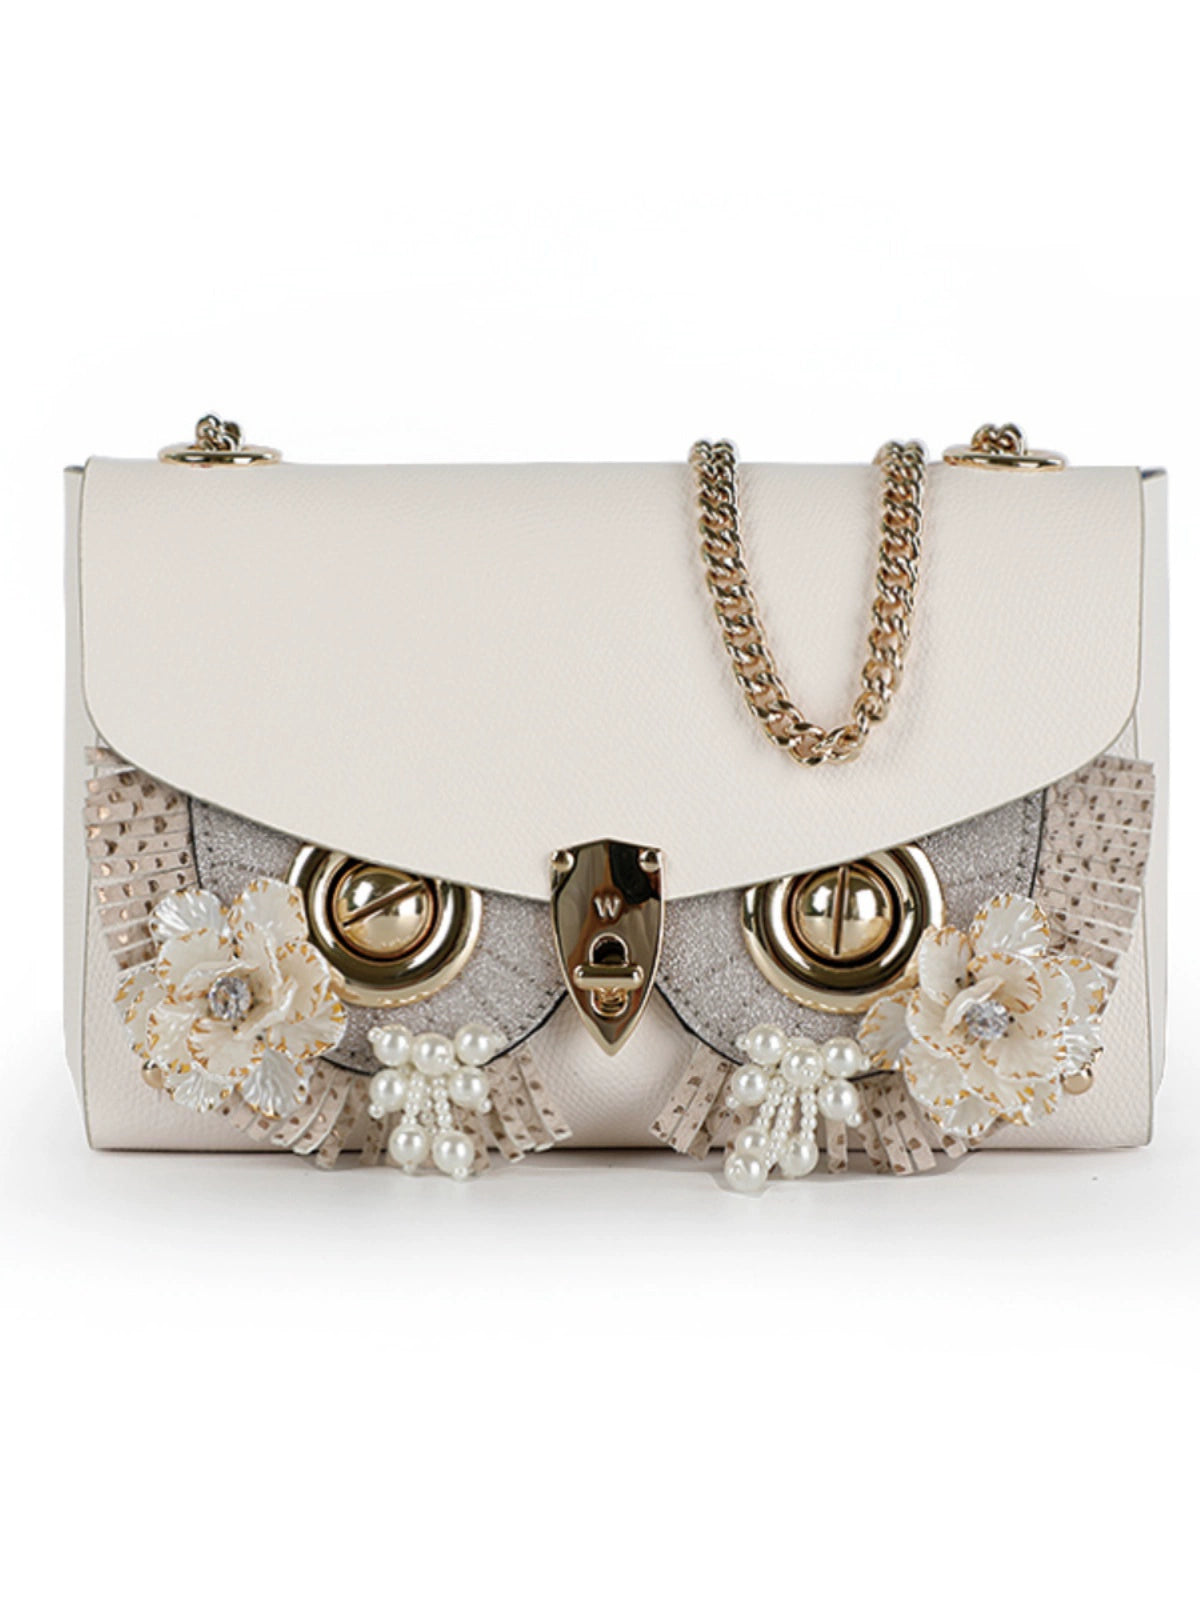 WANACCESSORY double-sided two-color owl face changing envelope bag alias series original design